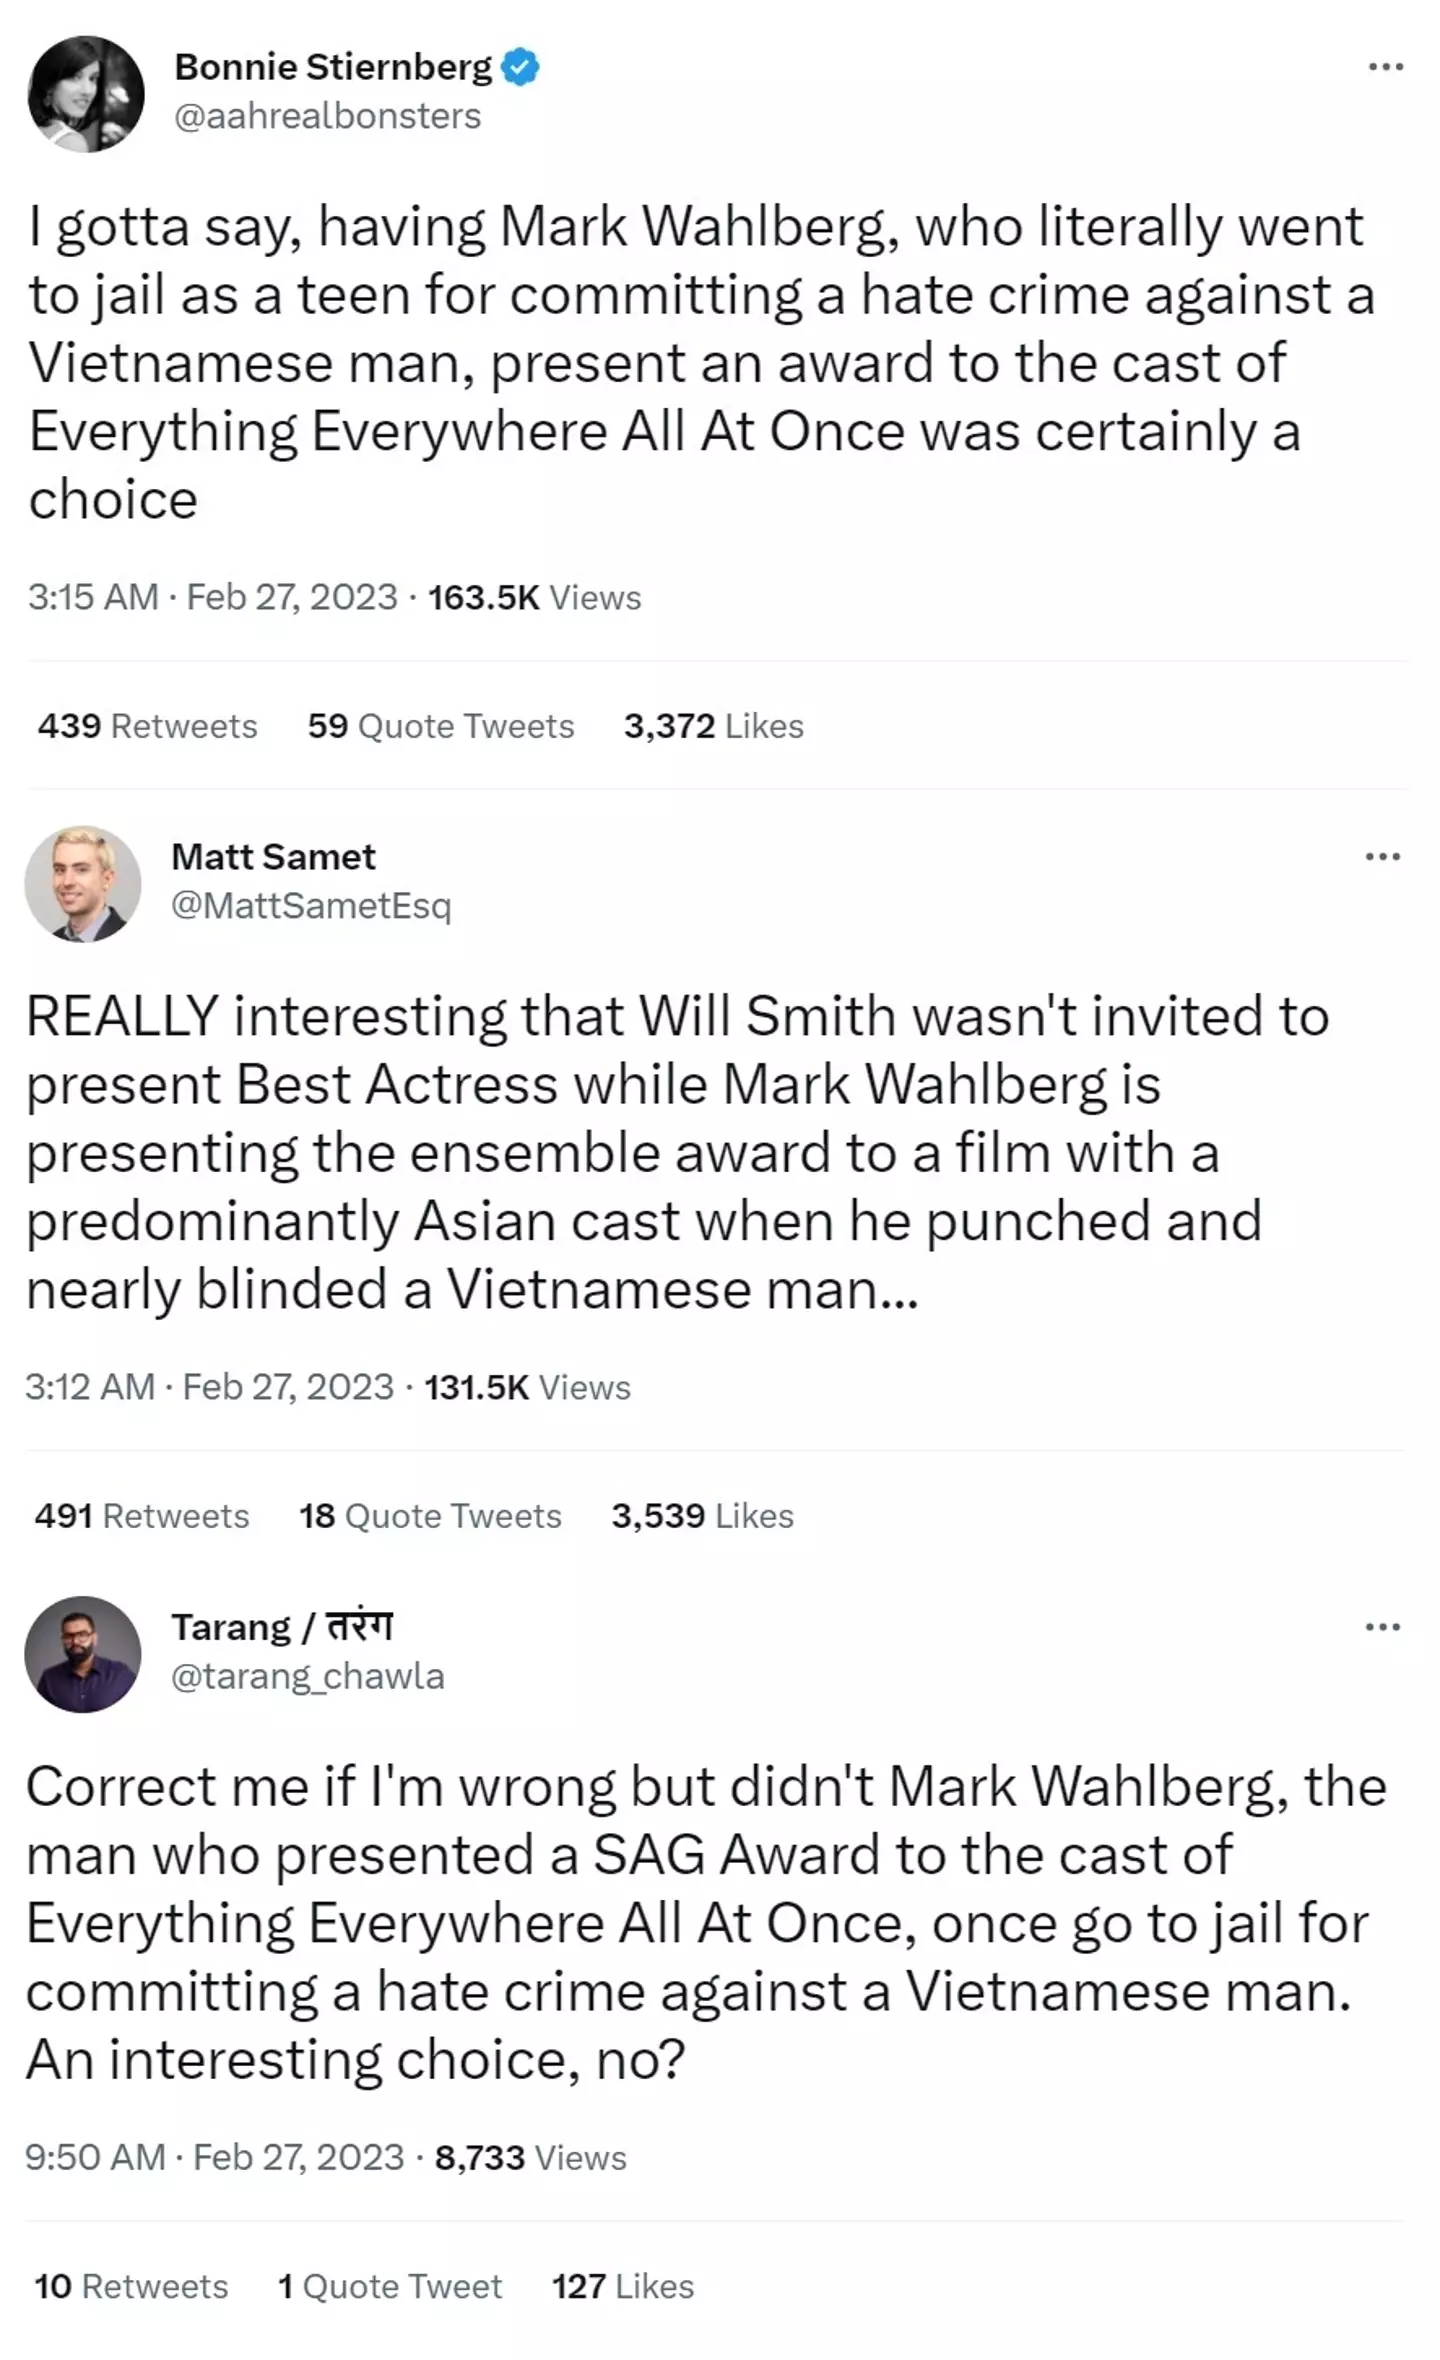 There was a significant backlash to Wahlberg being the one to present the award.